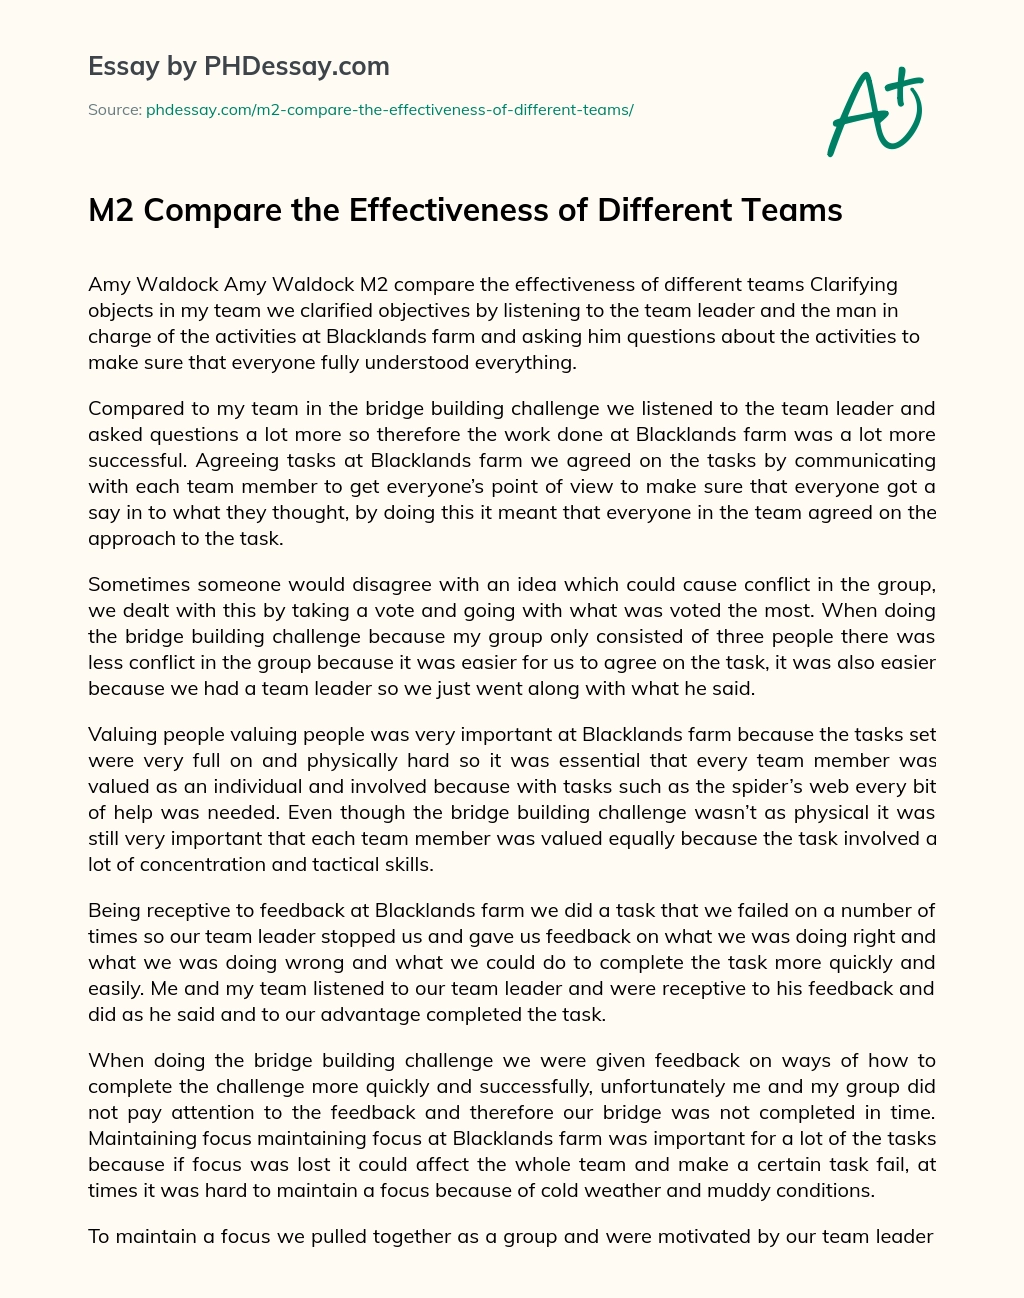 M2 Compare the Effectiveness of Different Teams essay